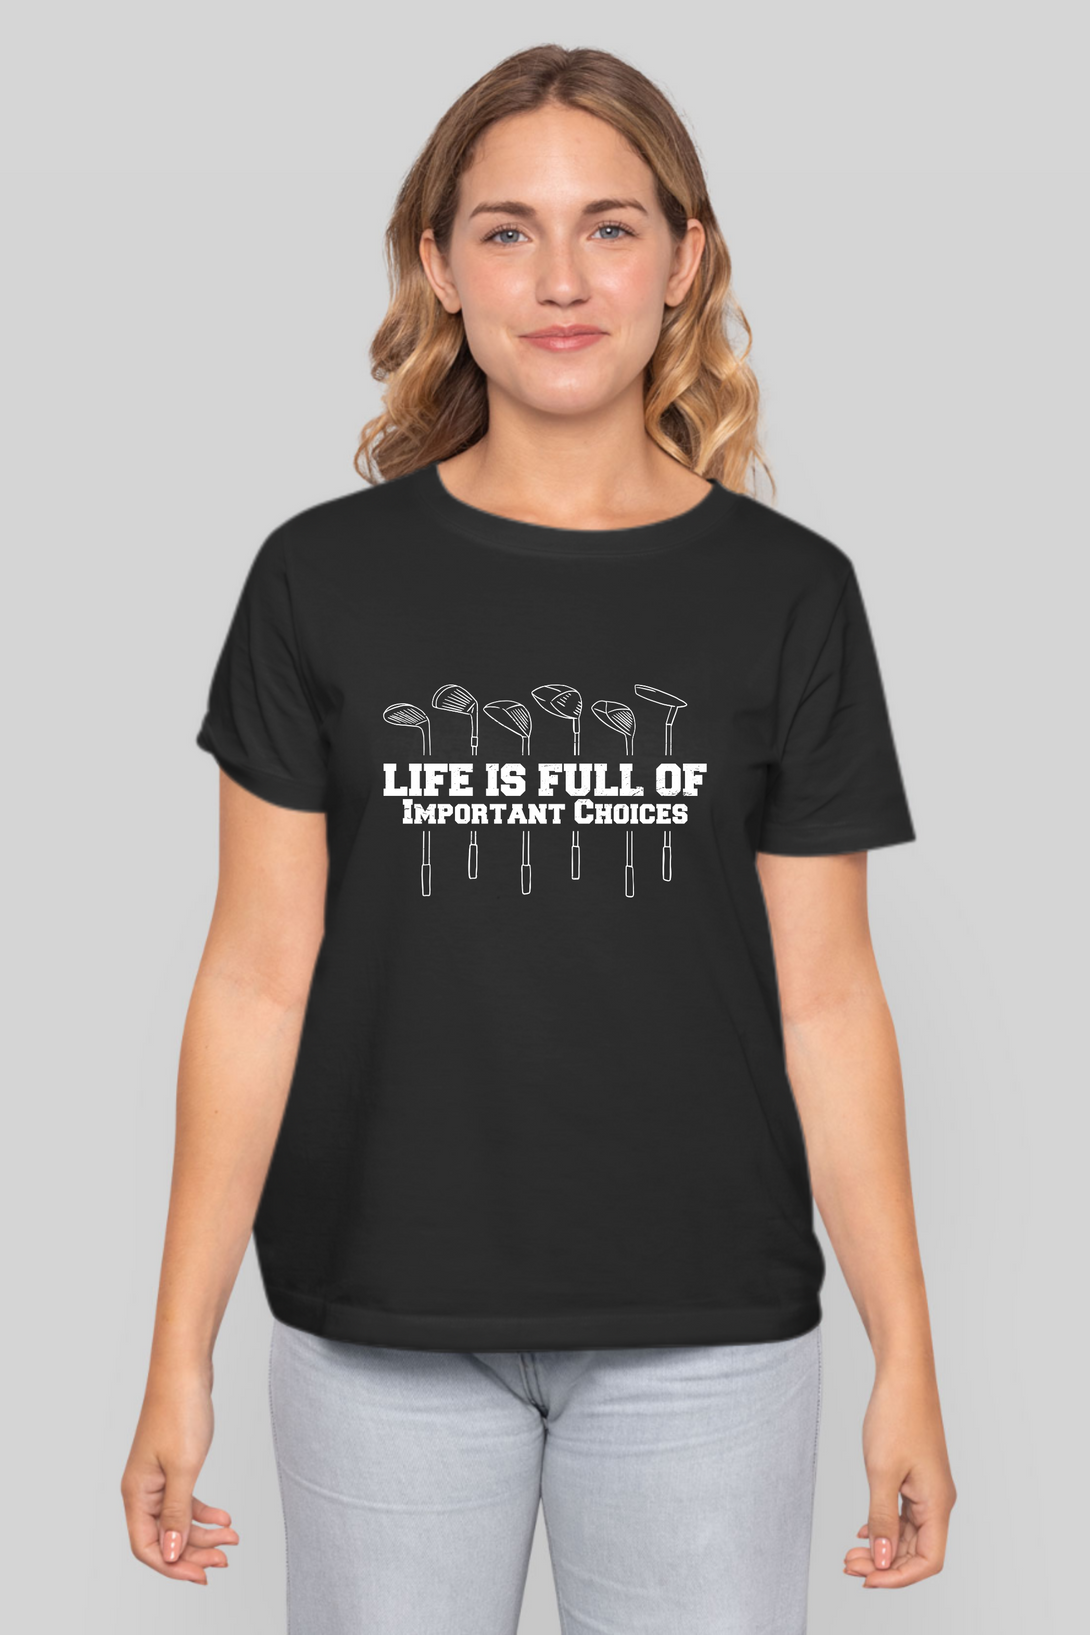 Life Is Full Of Important Choices Printed T-Shirt For Women - WowWaves - 7